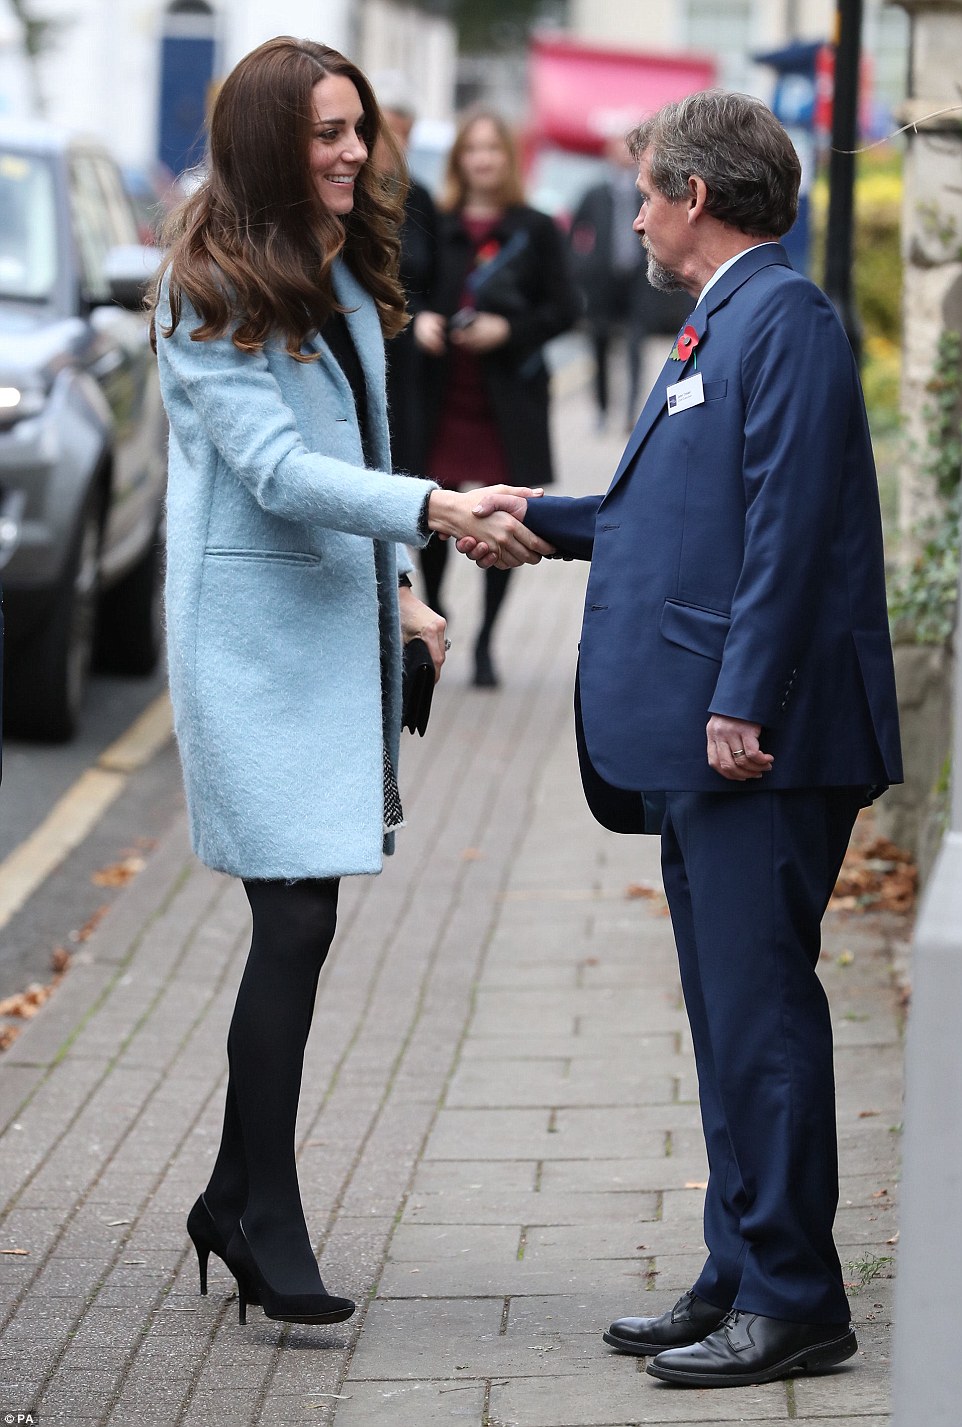 3a10129e00000578-3904856-the_duchess_of_cambridge_wrapped_up_warm_in_a_baby_blue_mulberry-m-24_1478263524101-1